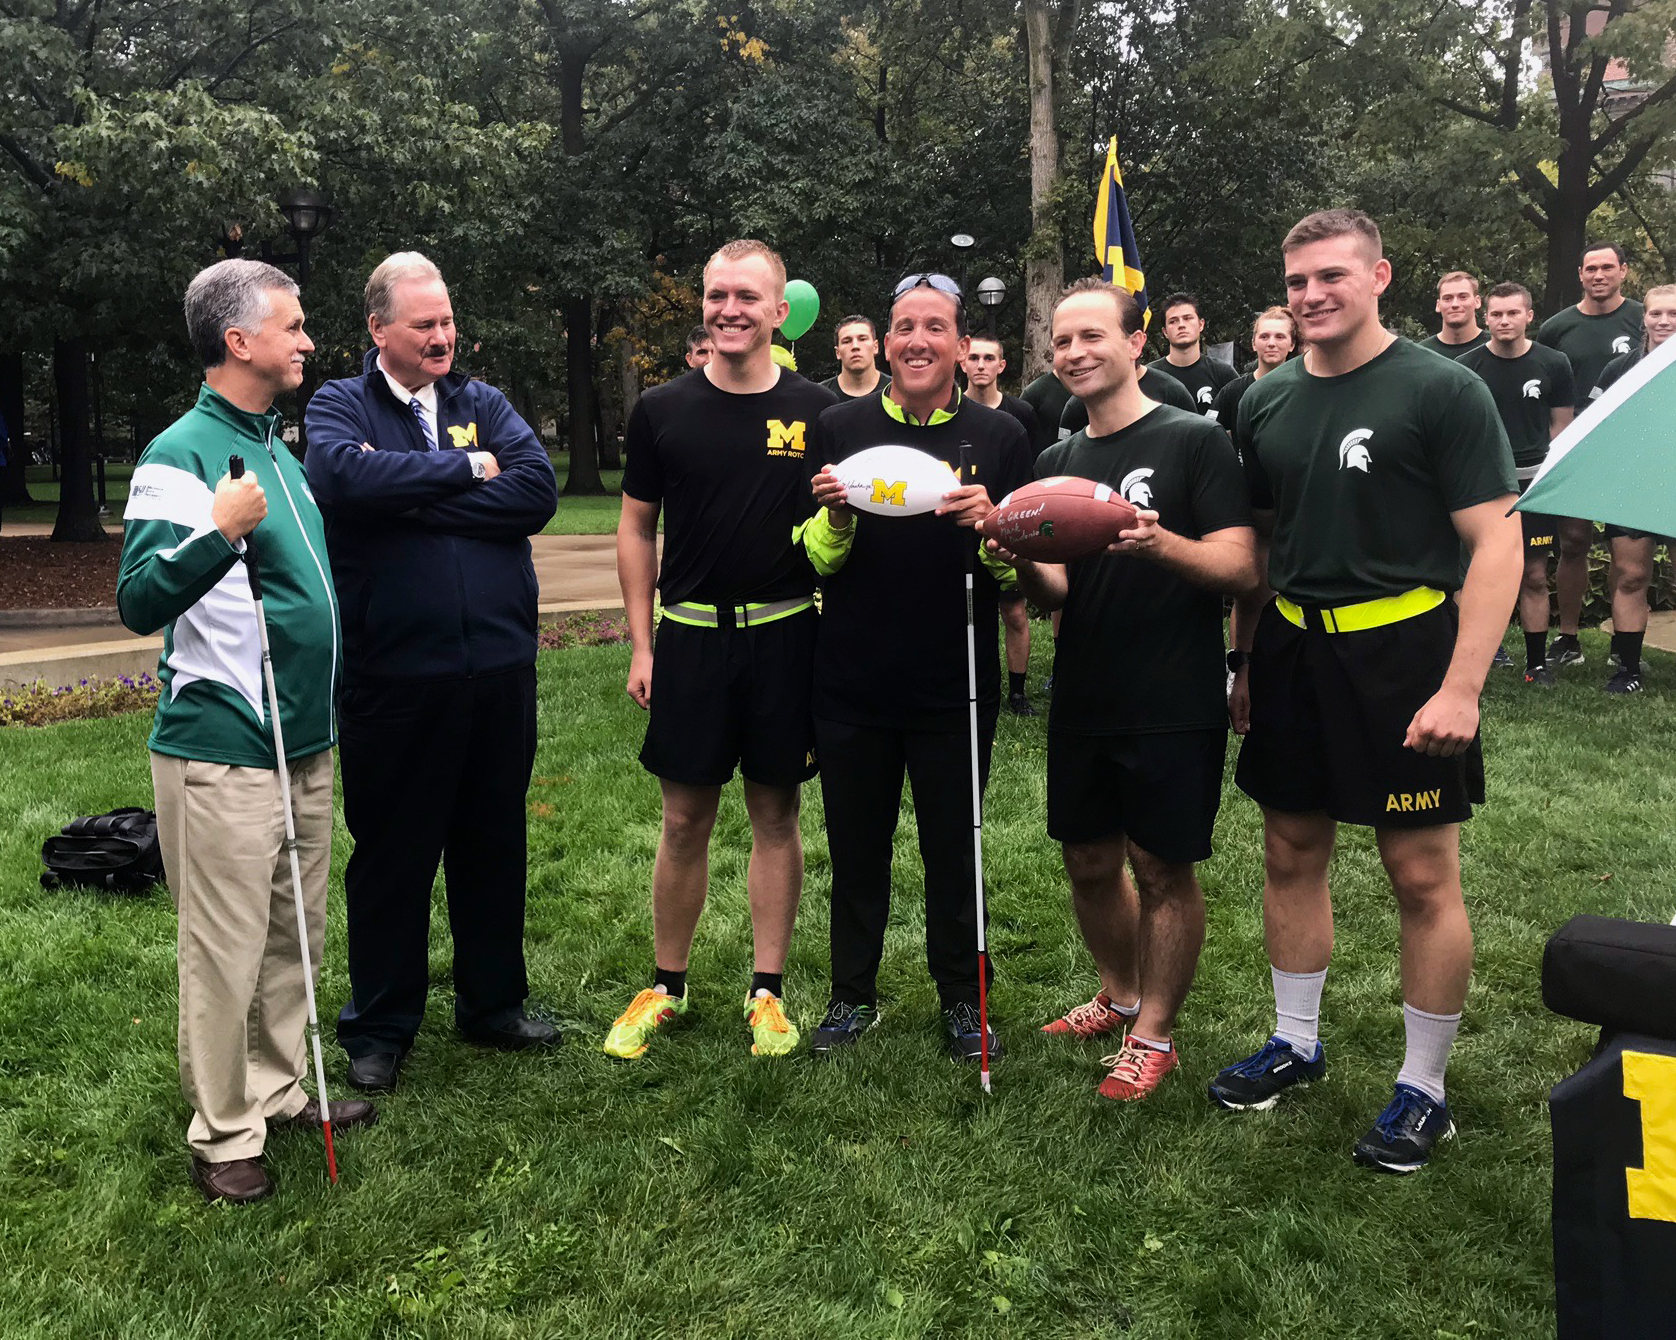 University of Michigan and Michigan State University members holding the football pre-game